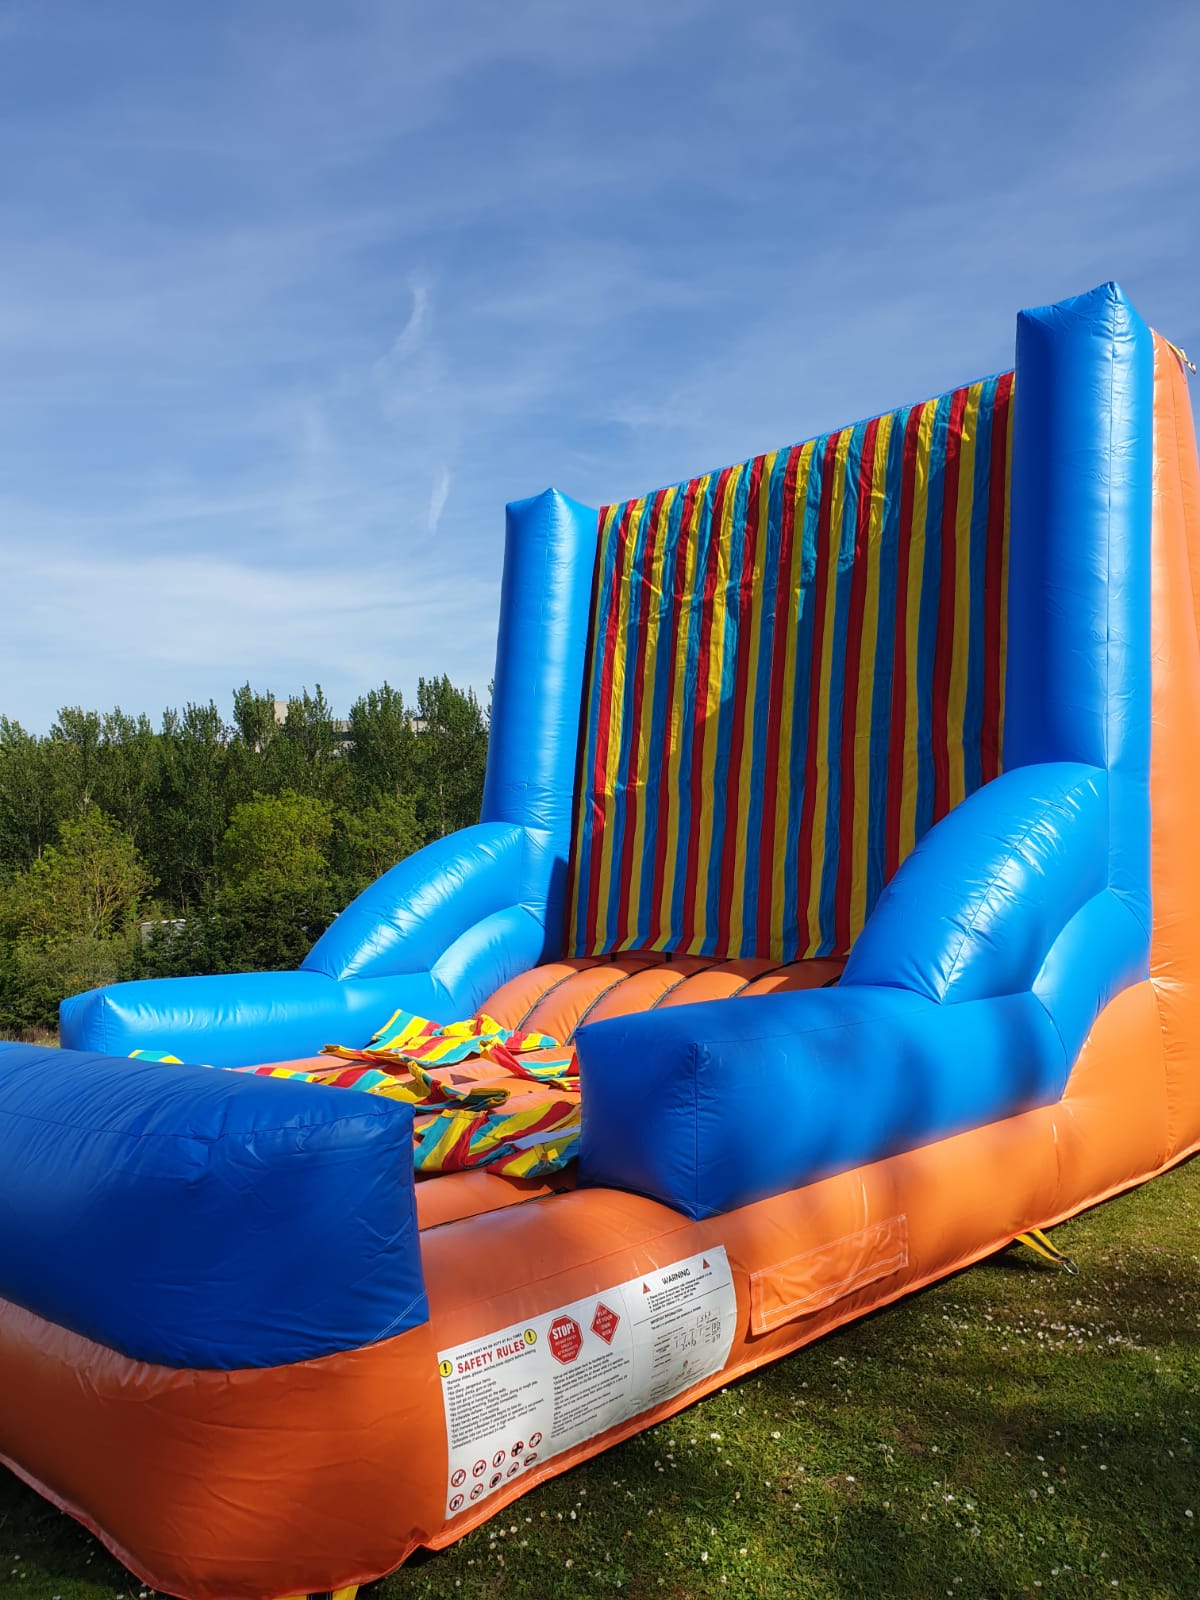 Sticky Velcro Wall Challenge, Rent Inflatable Velcro Wall